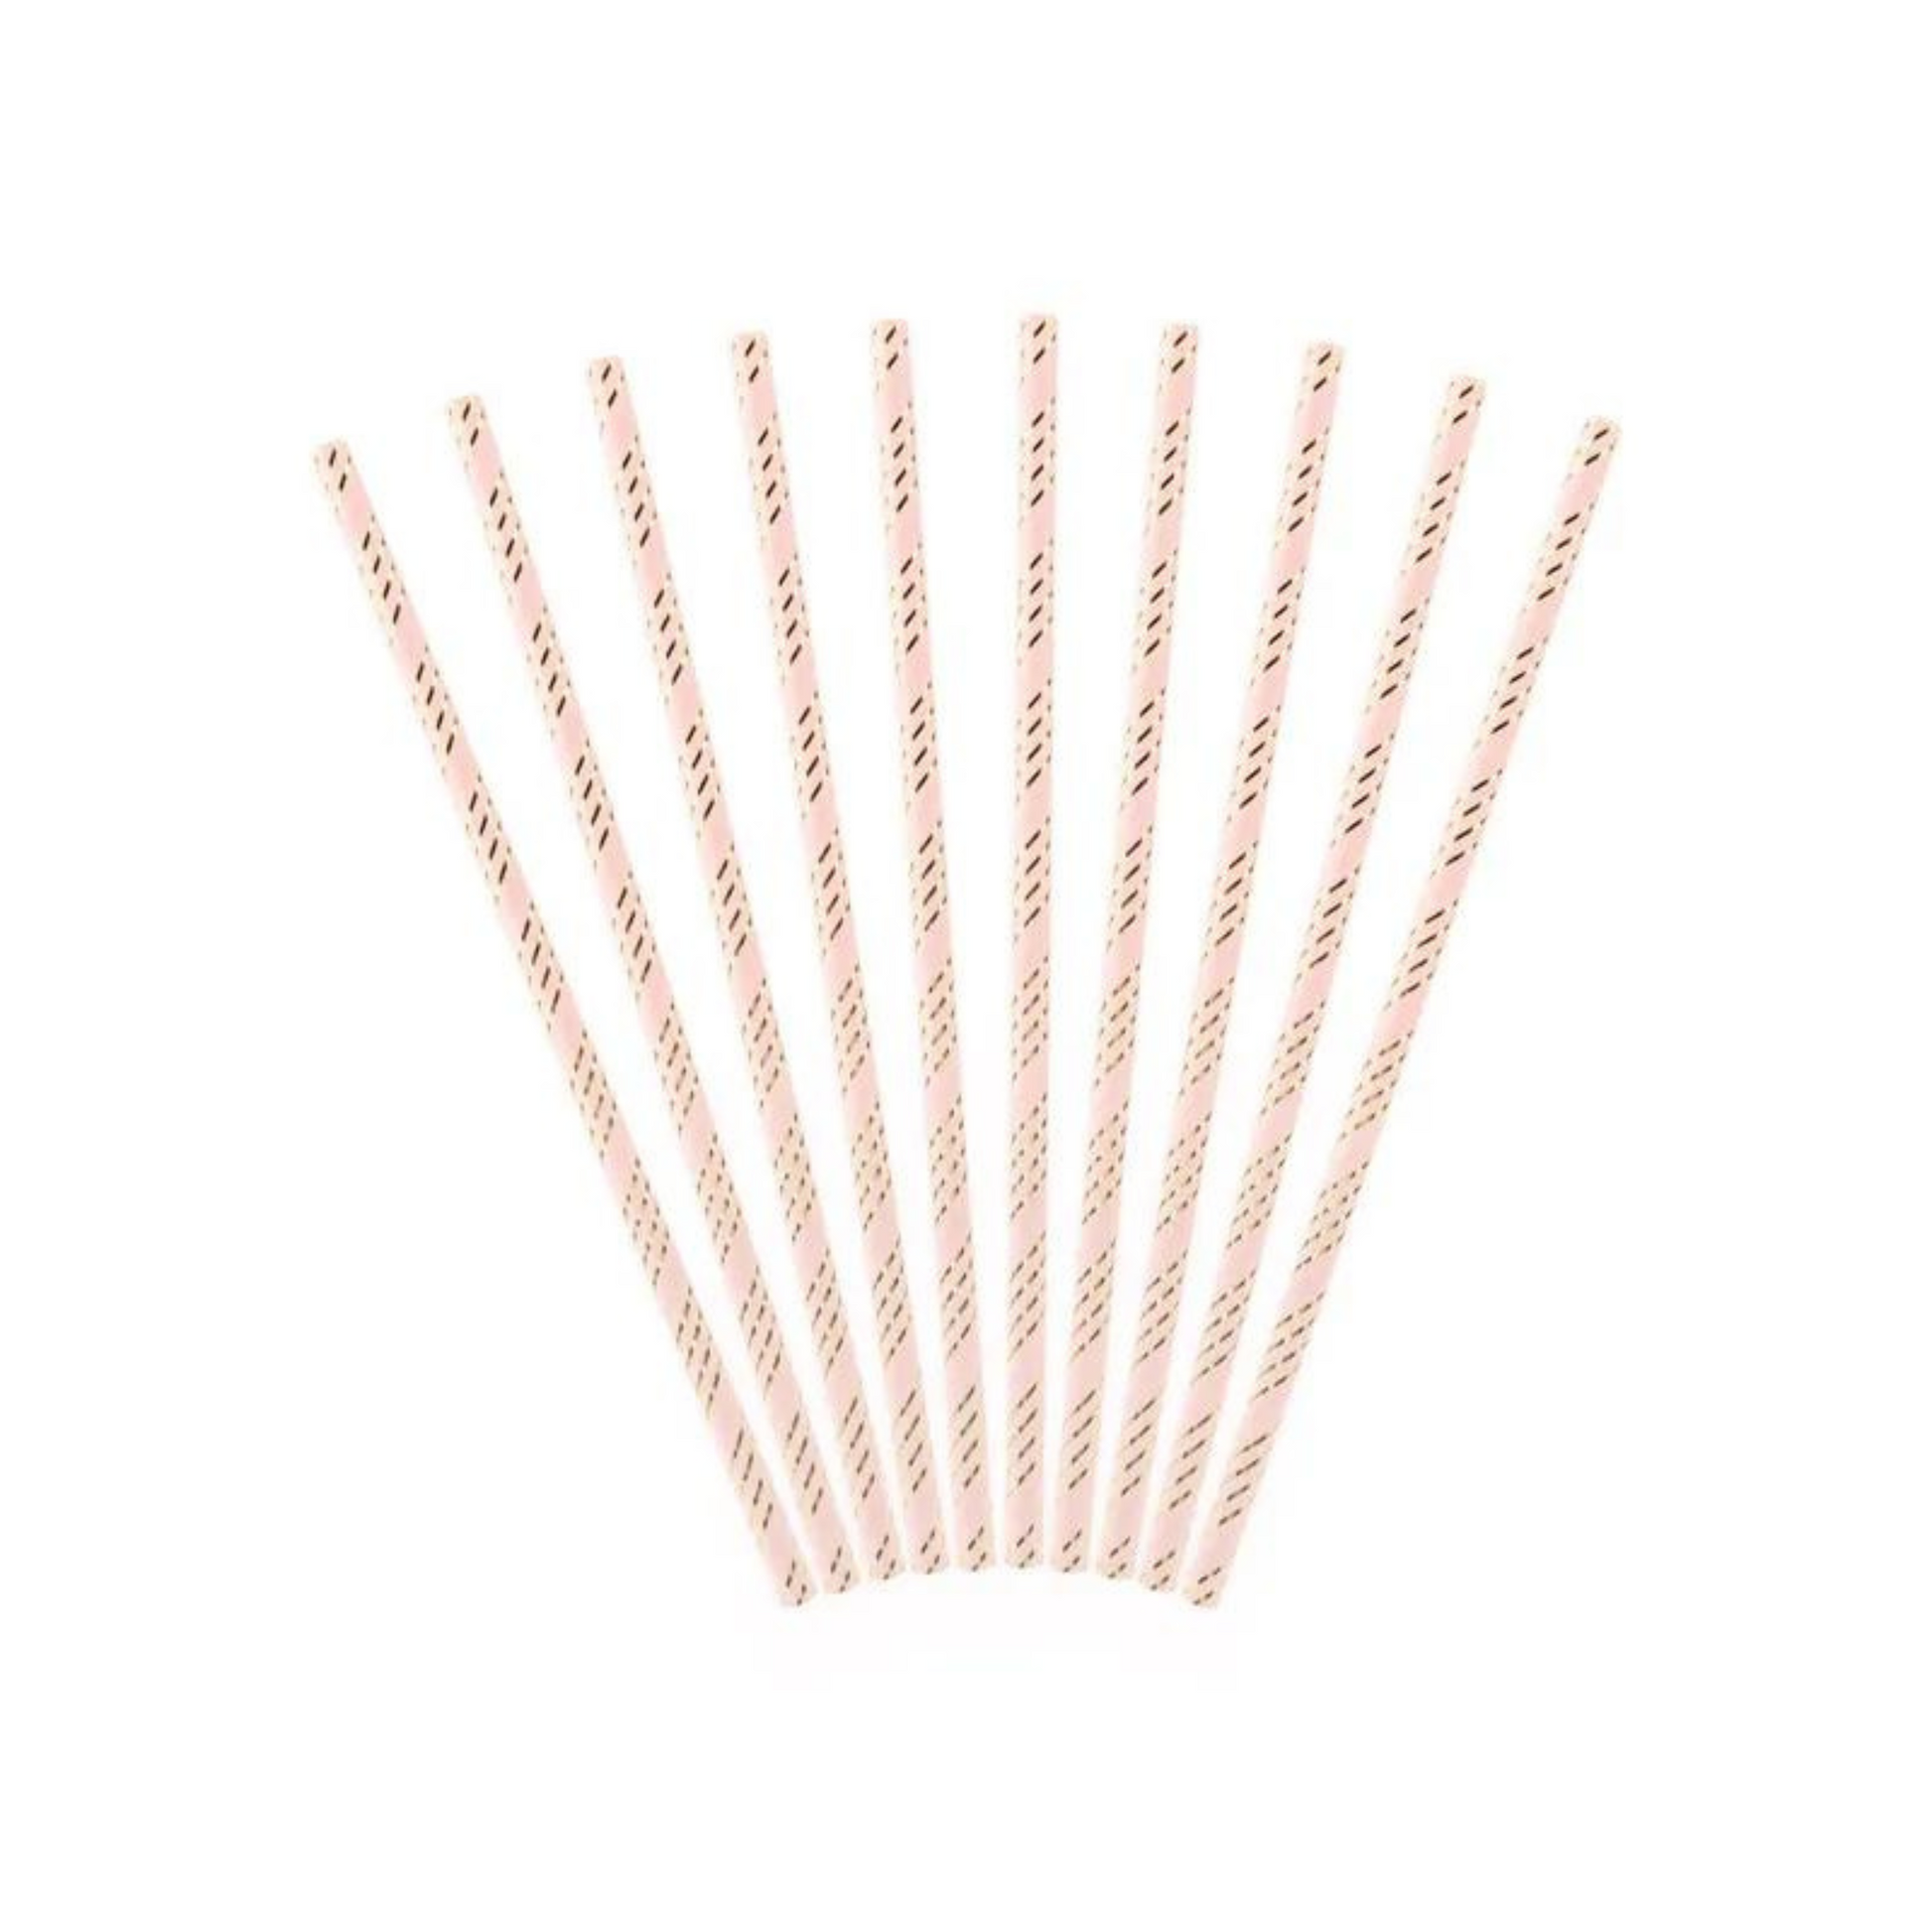 light pink and gold striped paper straws